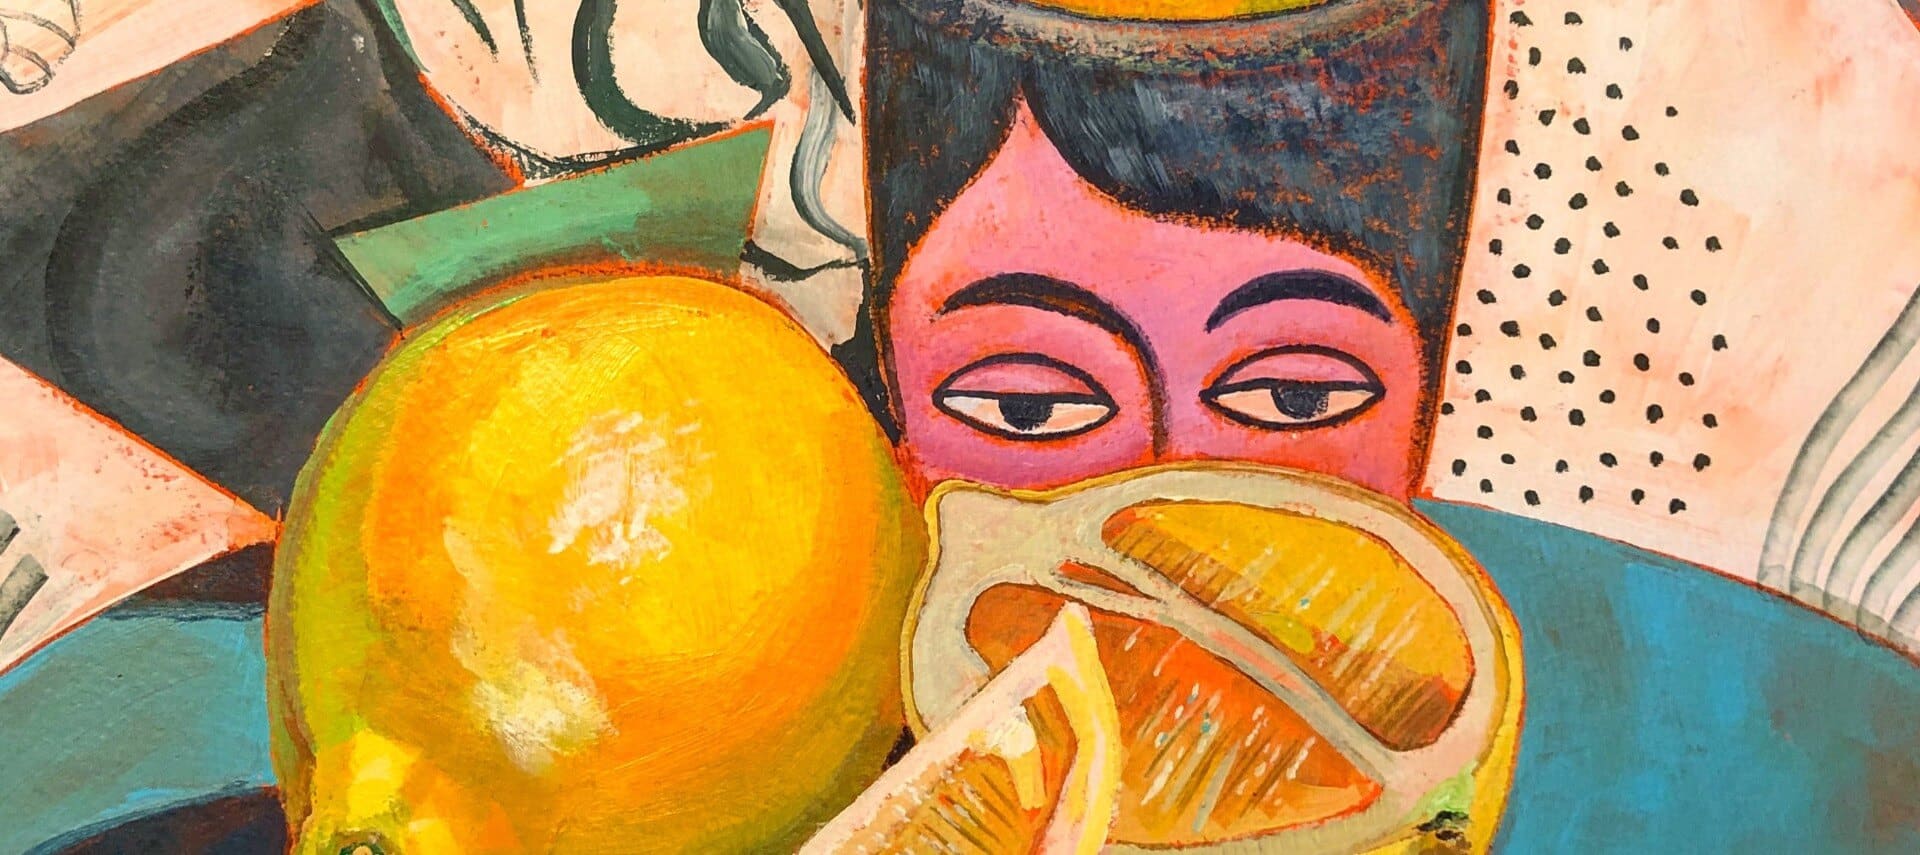 Painting of a personw ith black haor looking over a table with whole and cut lemons on it.